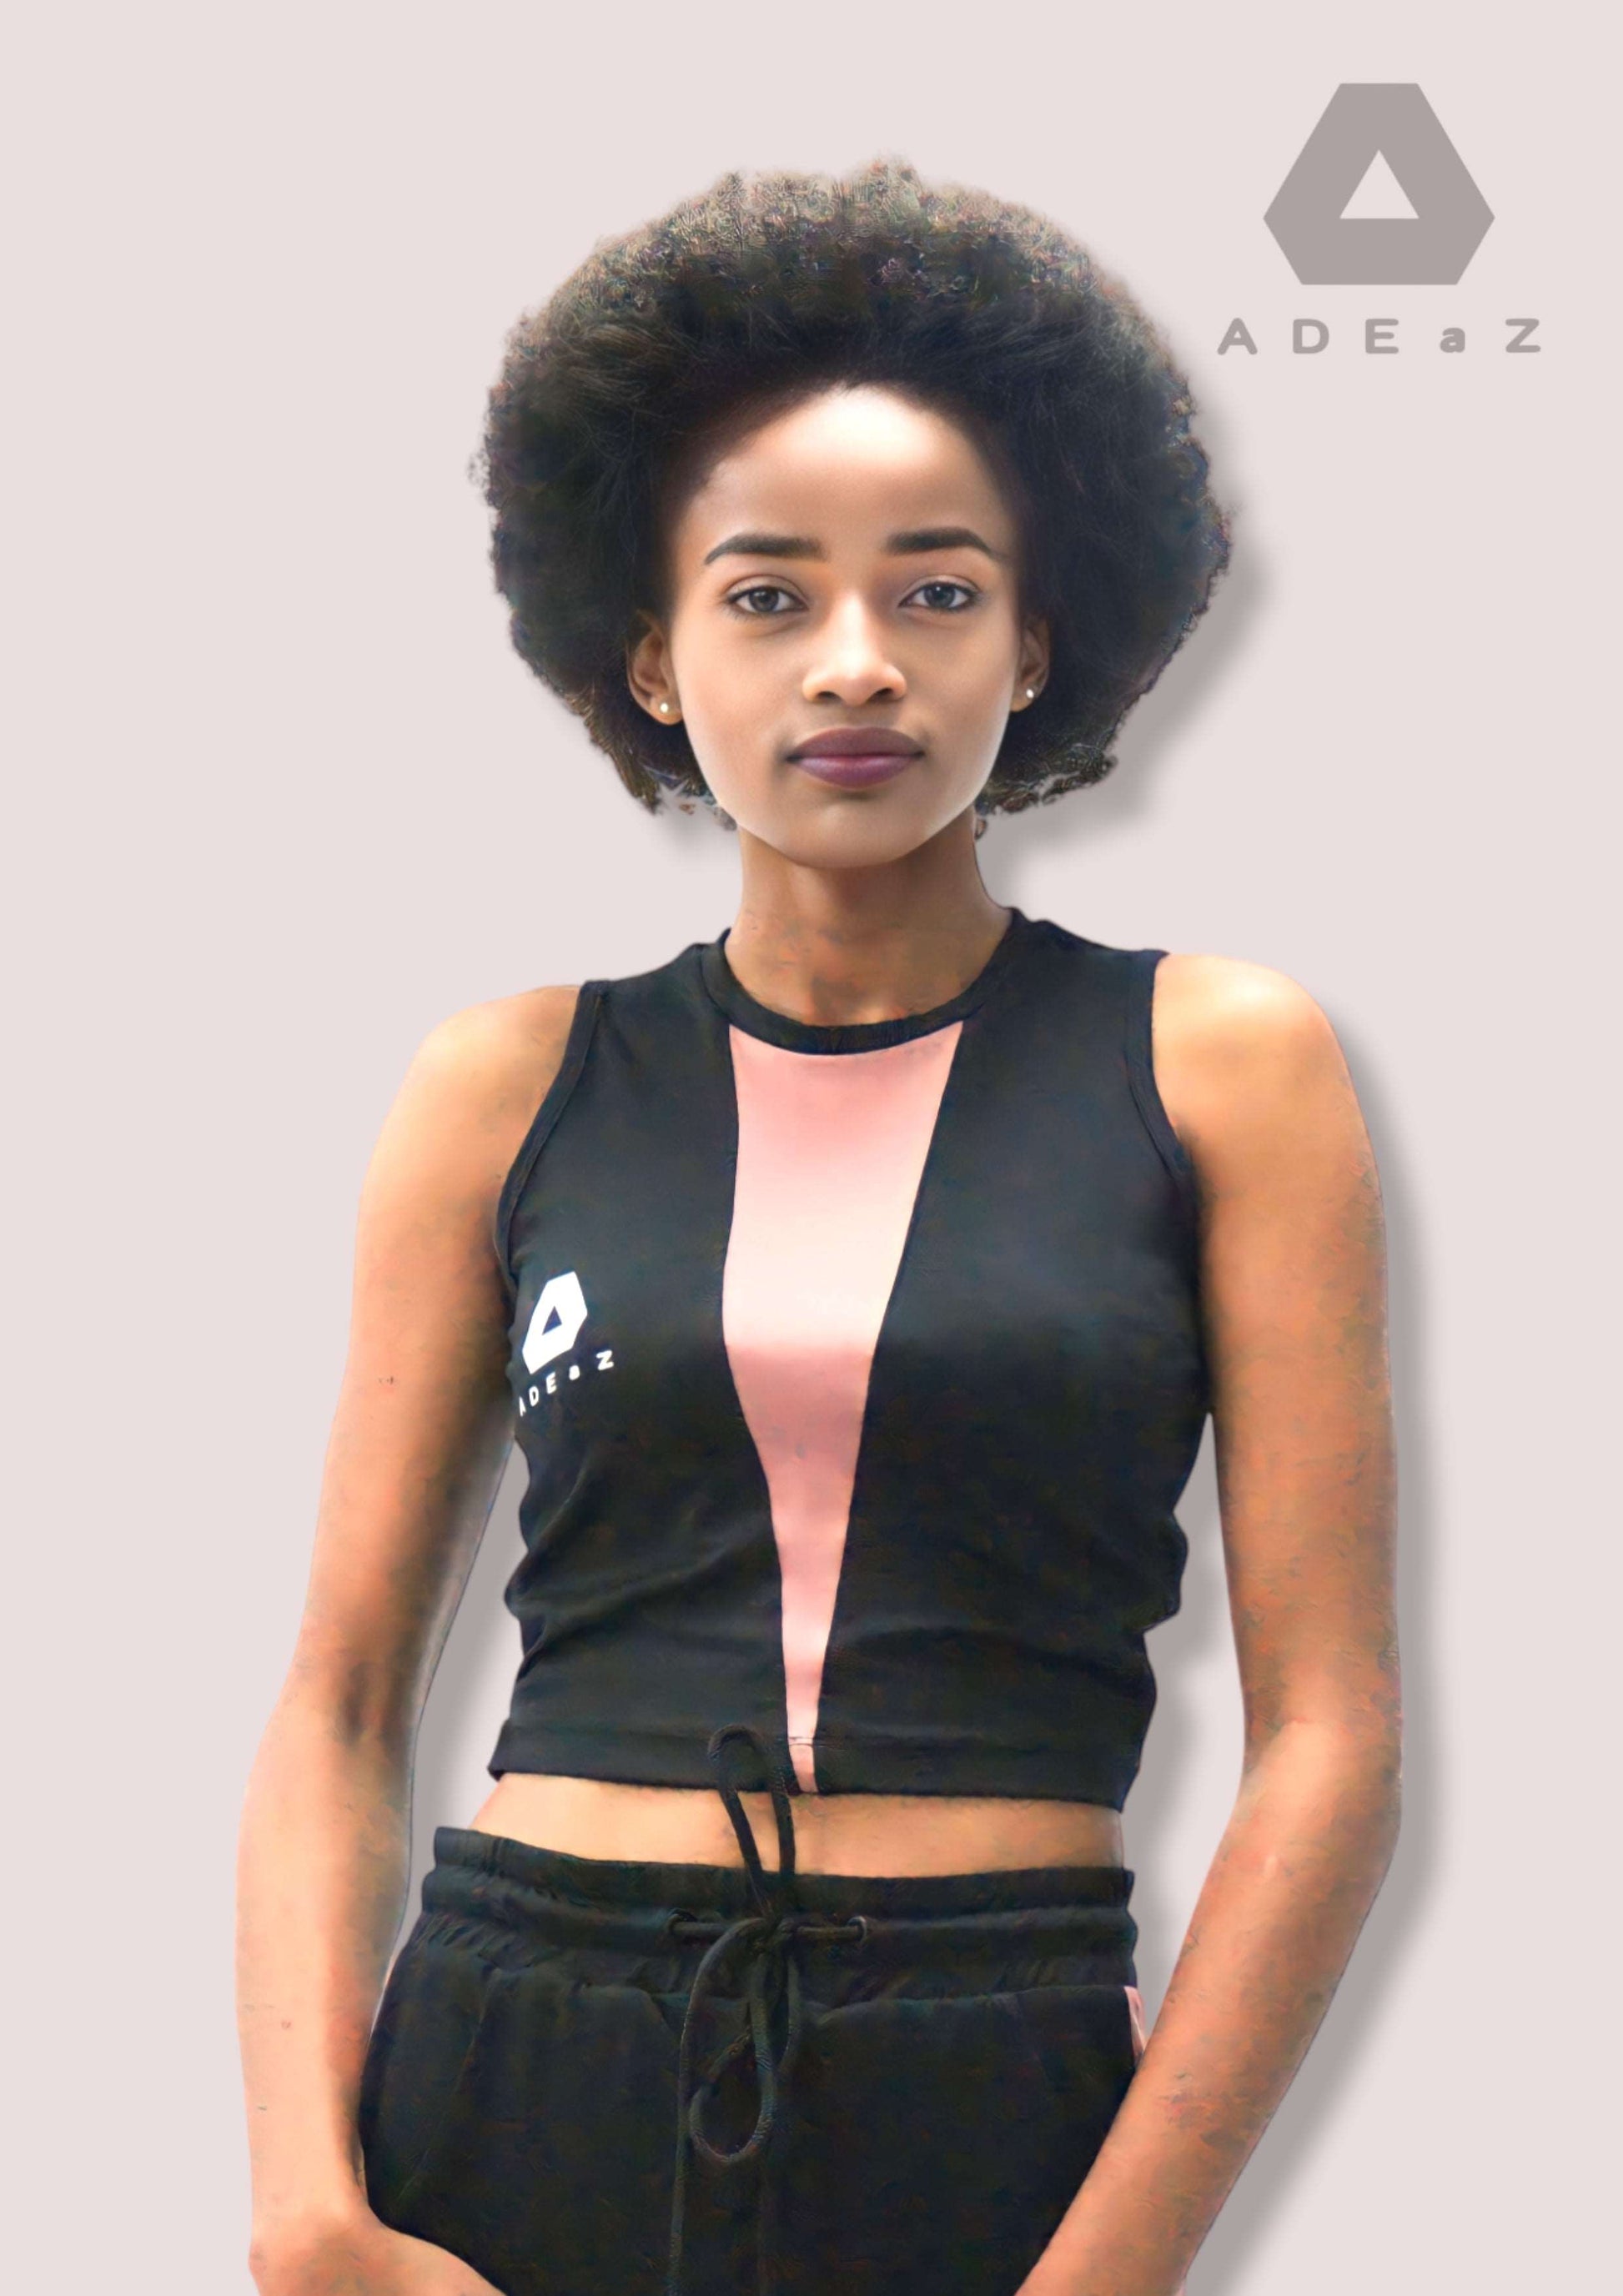 Sequined jewel crop top in vibrant shades of pink and black, adding sparkle and glamour to any outfit.